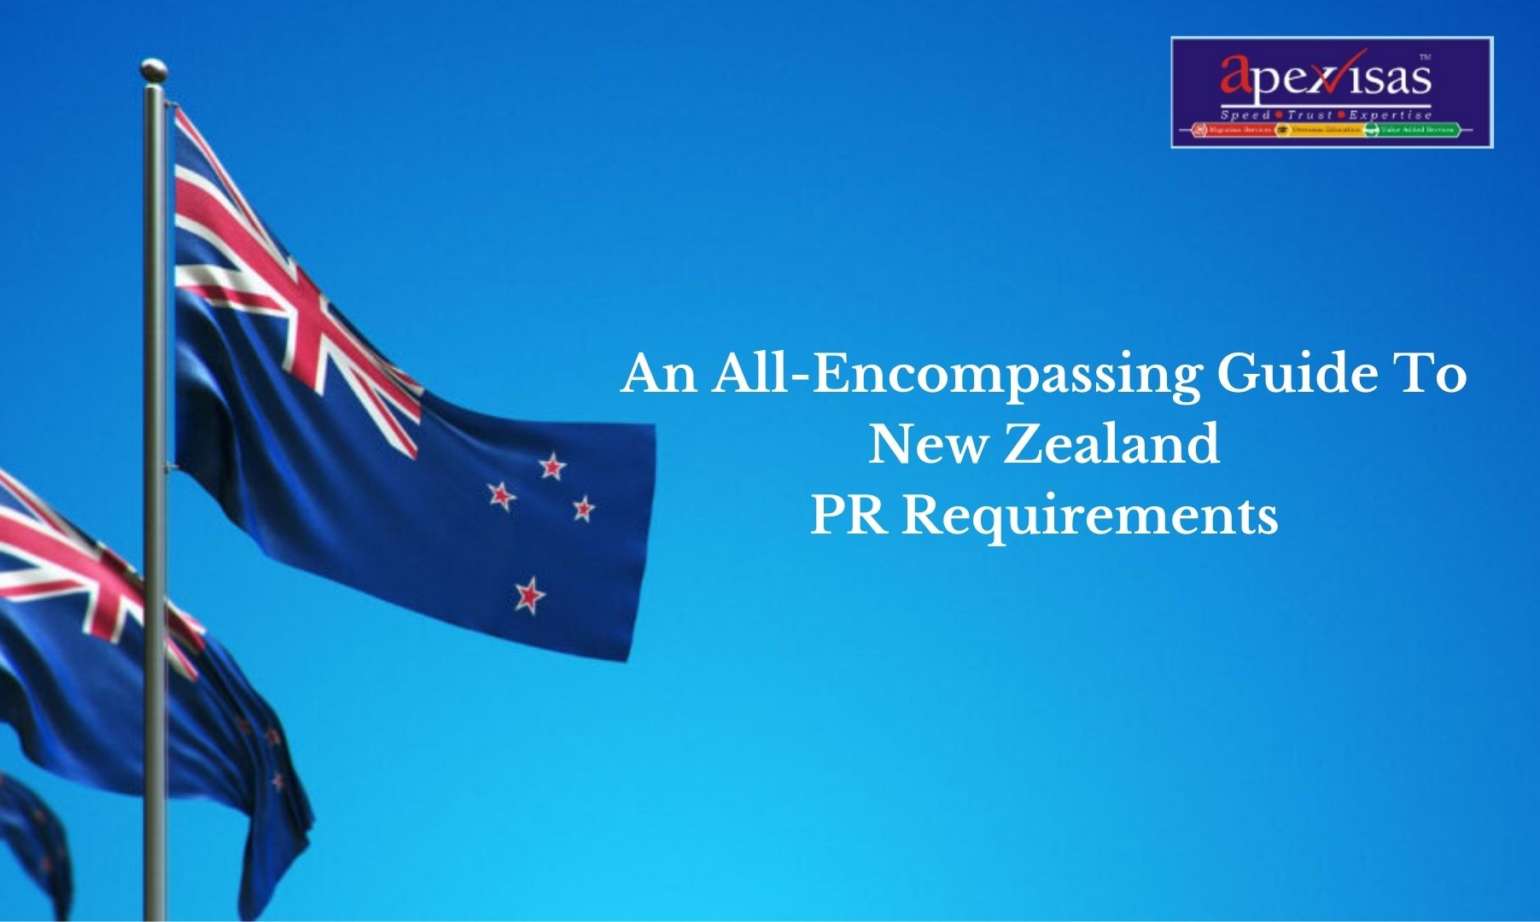 An All-Encompassing Guide To New Zealand PR Requirements